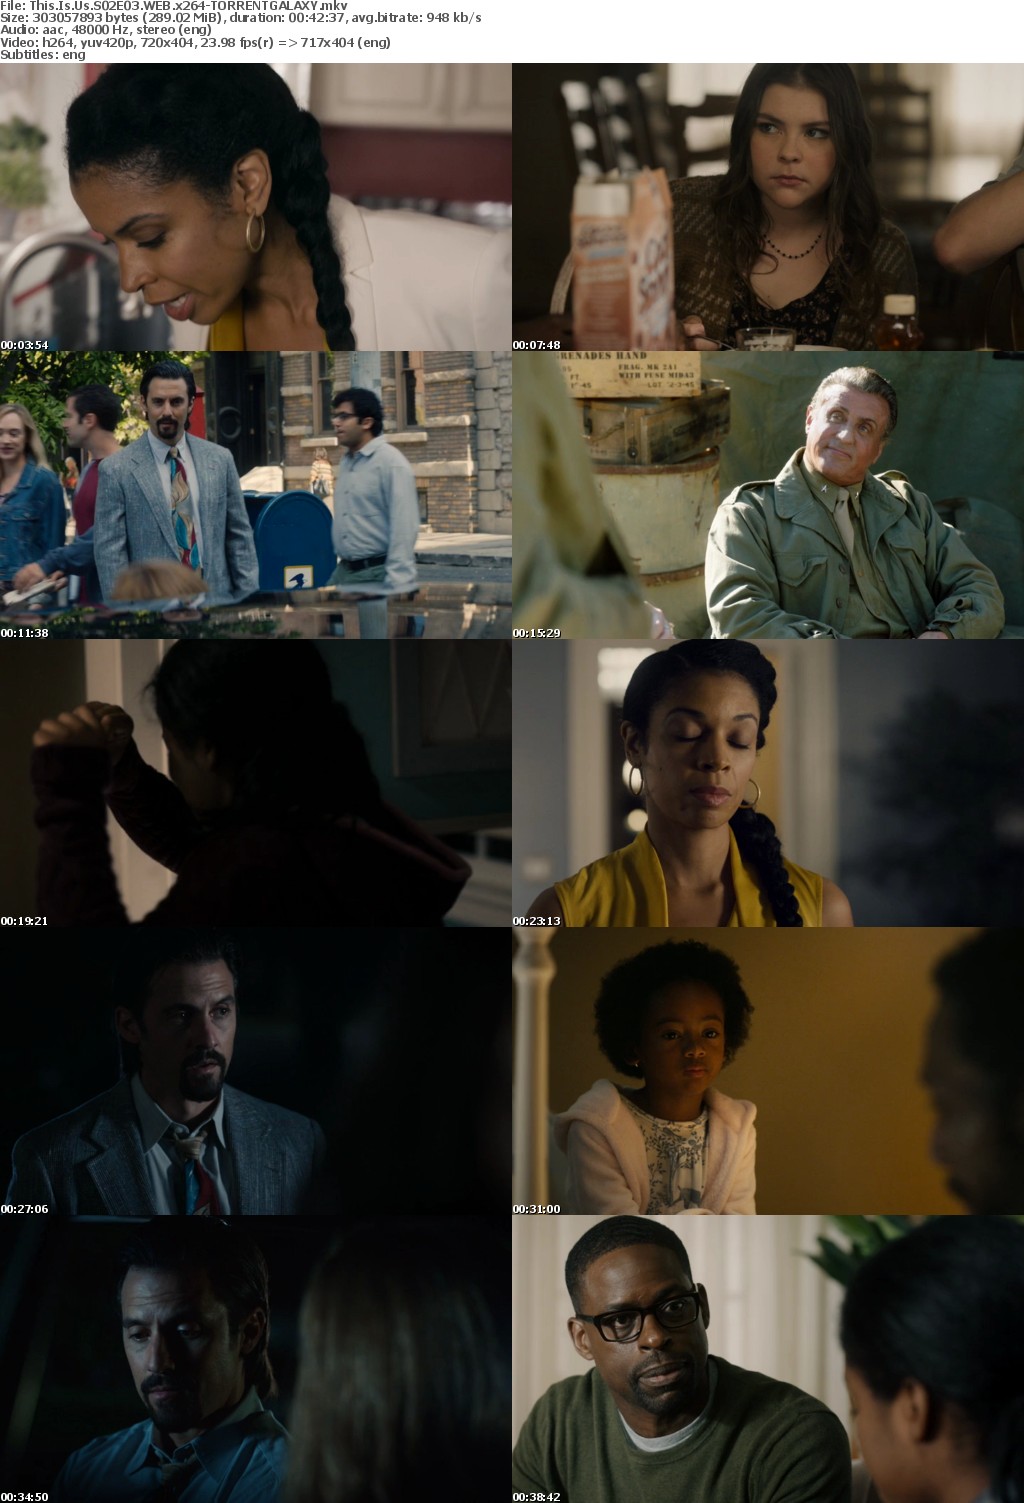 This Is Us S02E03 WEB x264-GALAXY